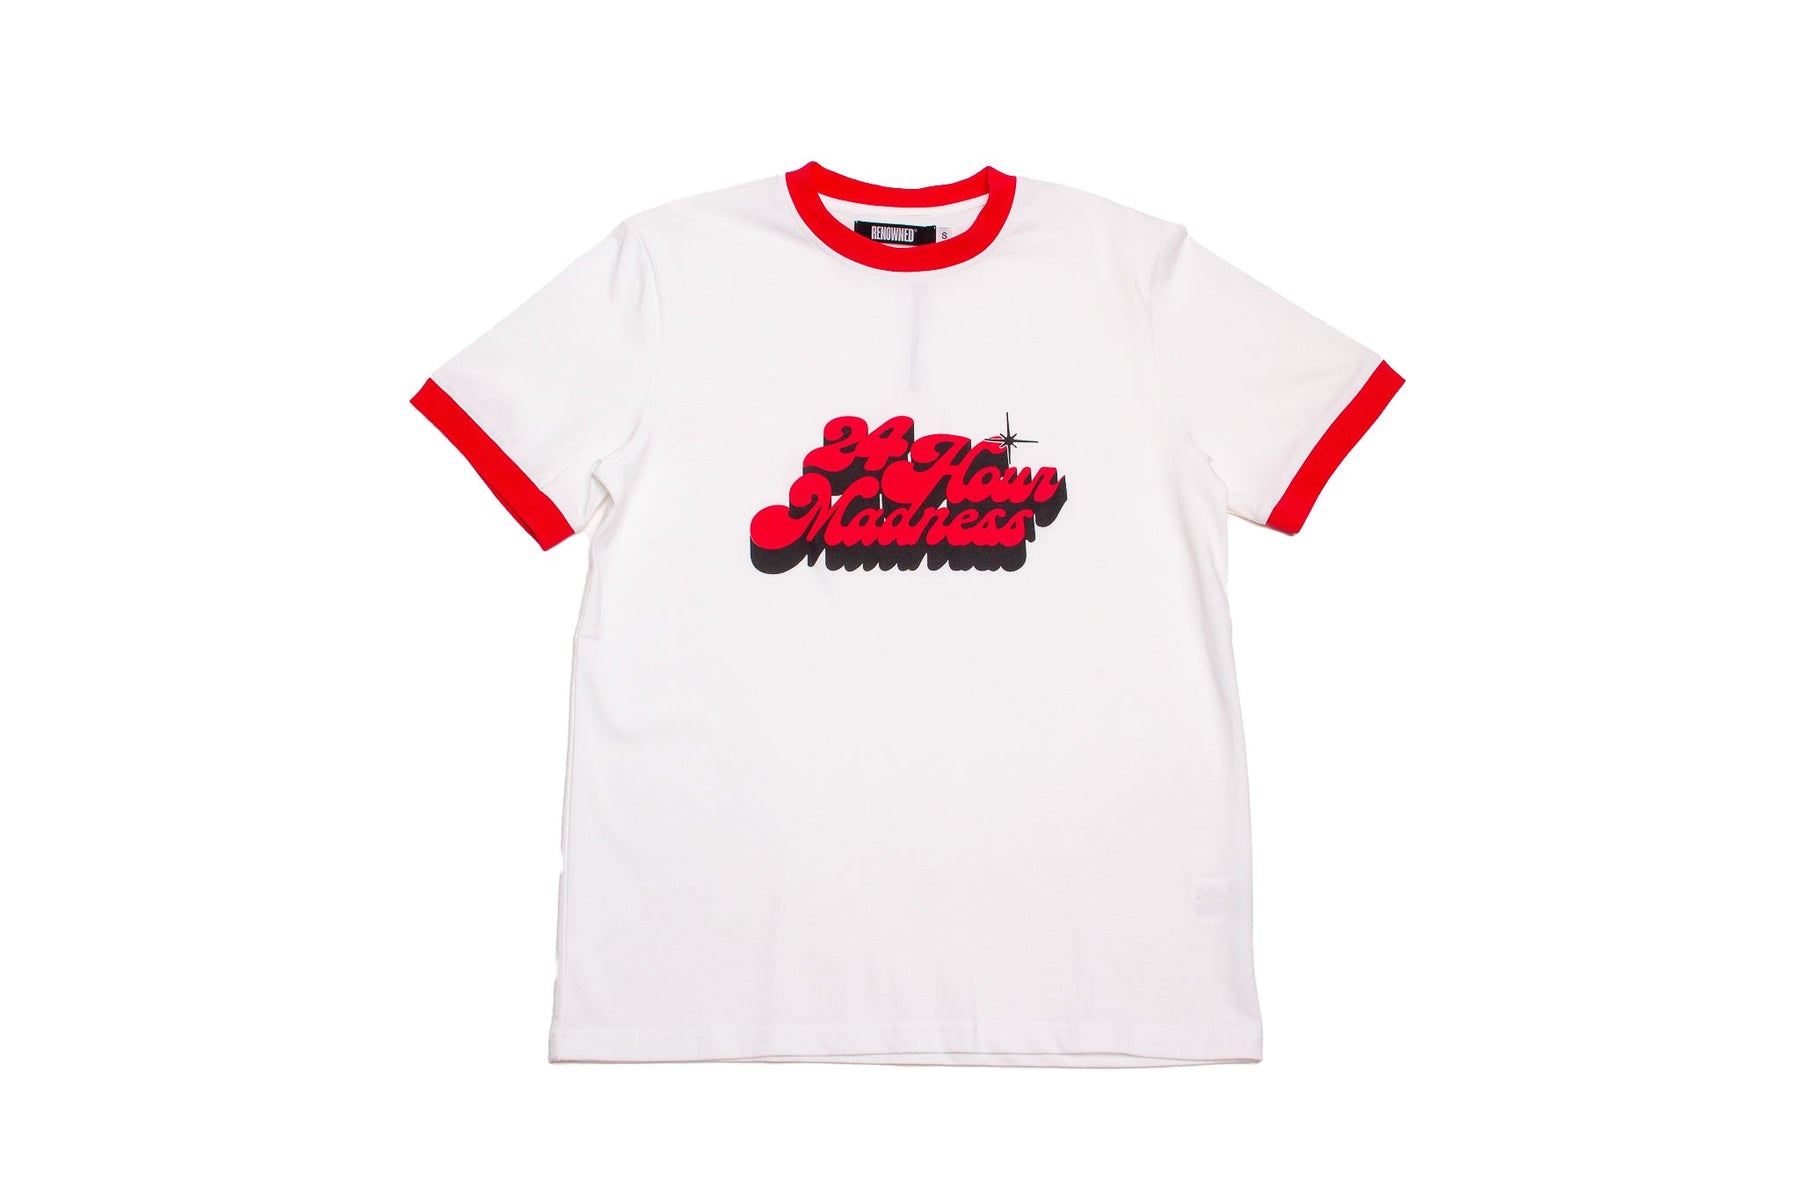 Renowned 24 Hour Madness Tee "White"